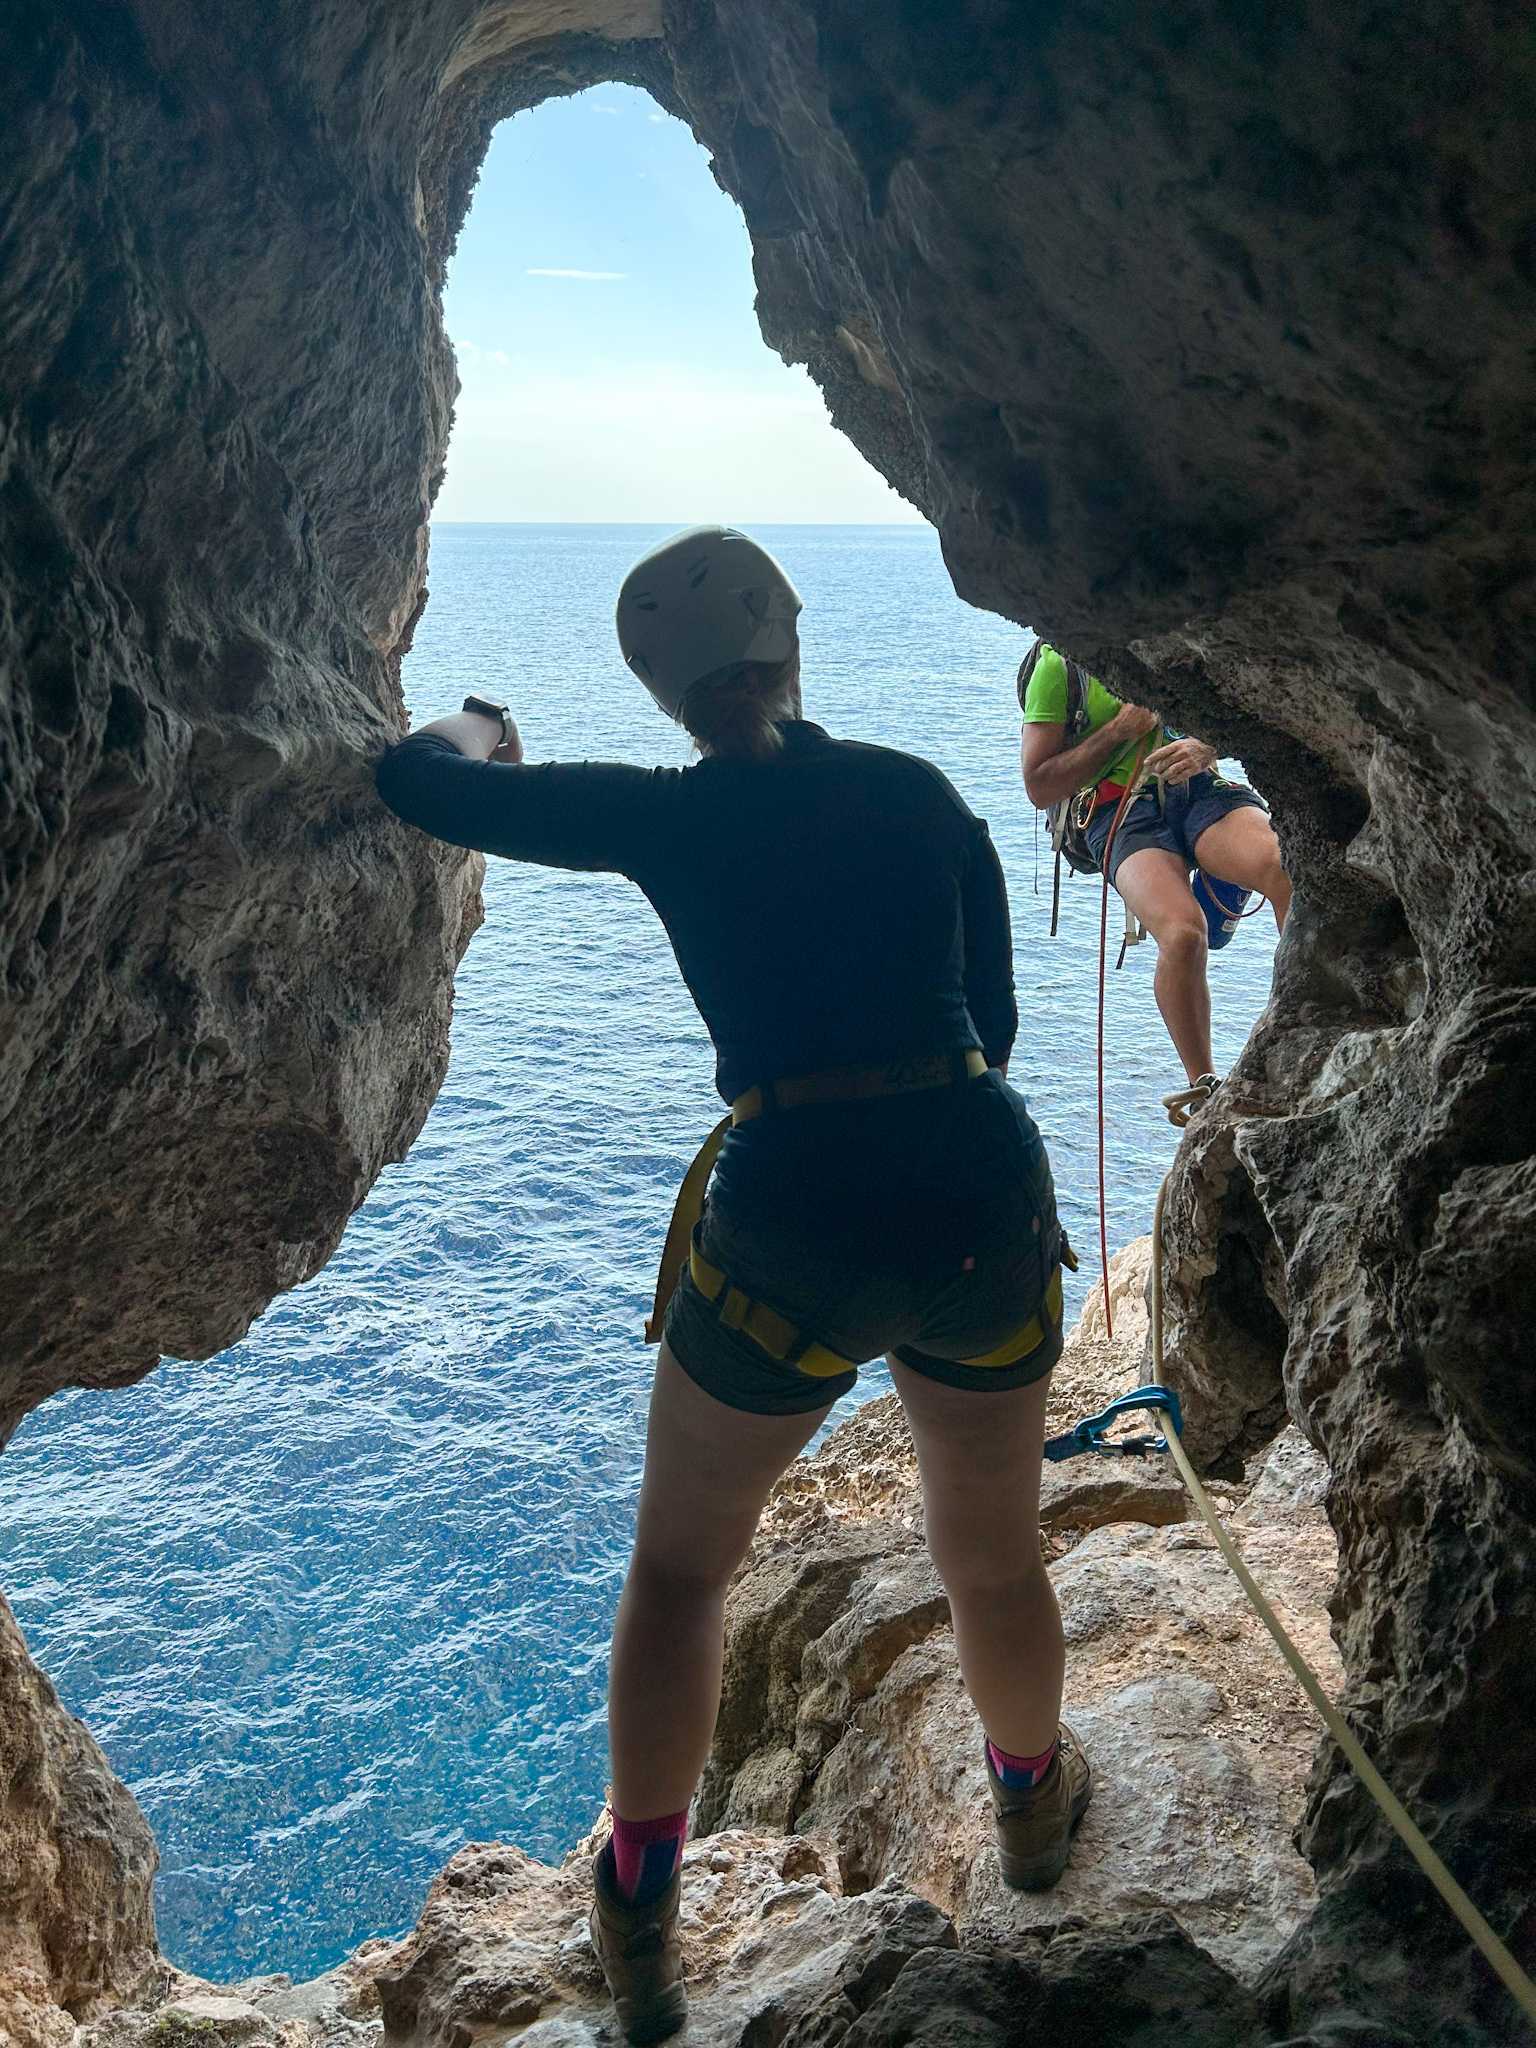 A roped climber in a cliffside cave, looking out to the sea, Sardinia.